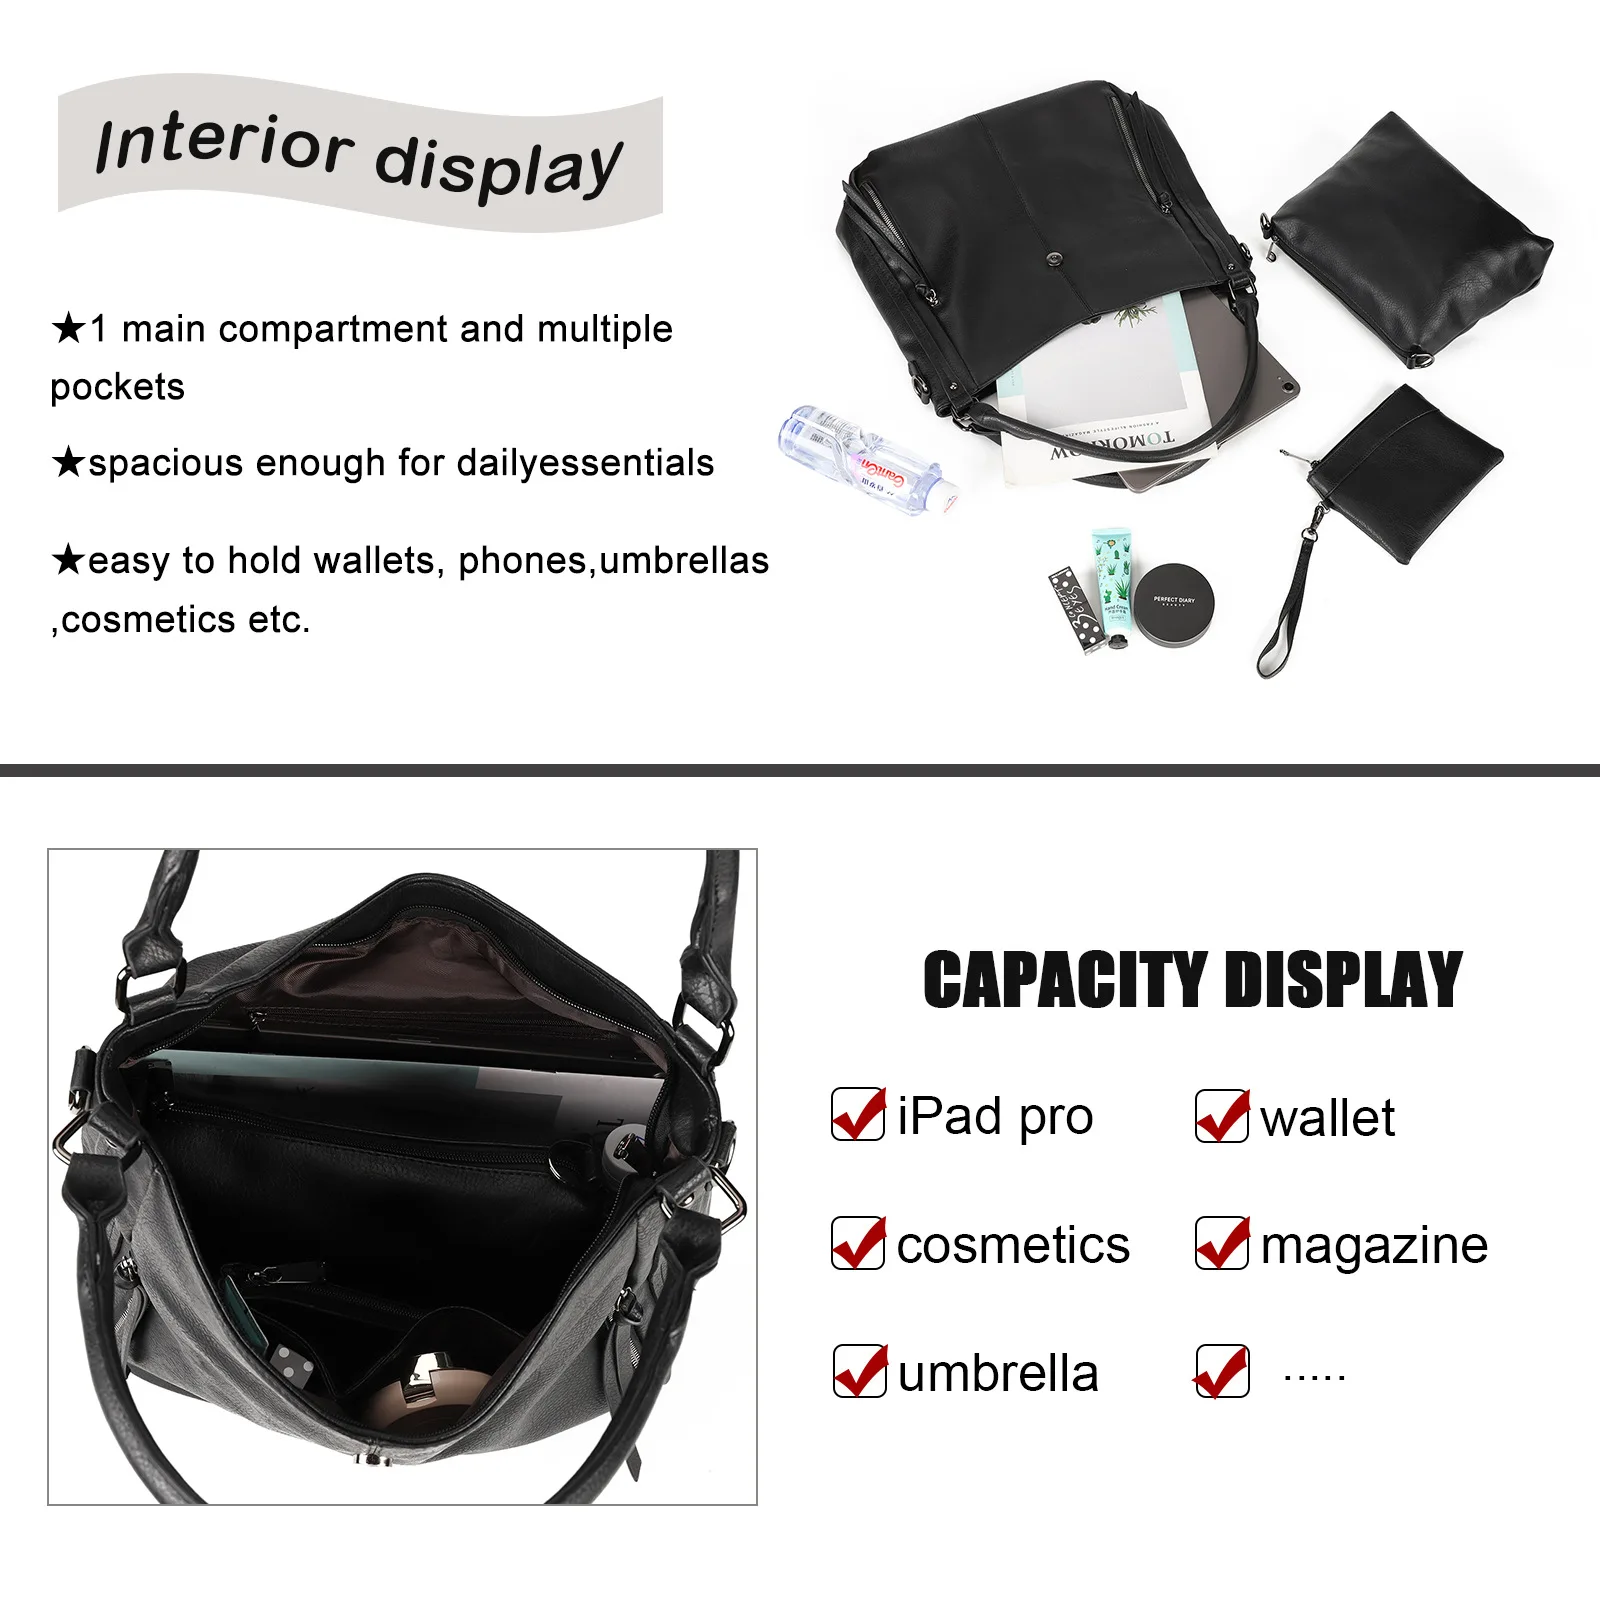 SCOFY FASHION 3 Pieces Set Tote Bags for Women Luxury Soft PU Leather Purses and Handbags Chic Leisure Crossbody Shoulder Bag best Women's Bags Totes